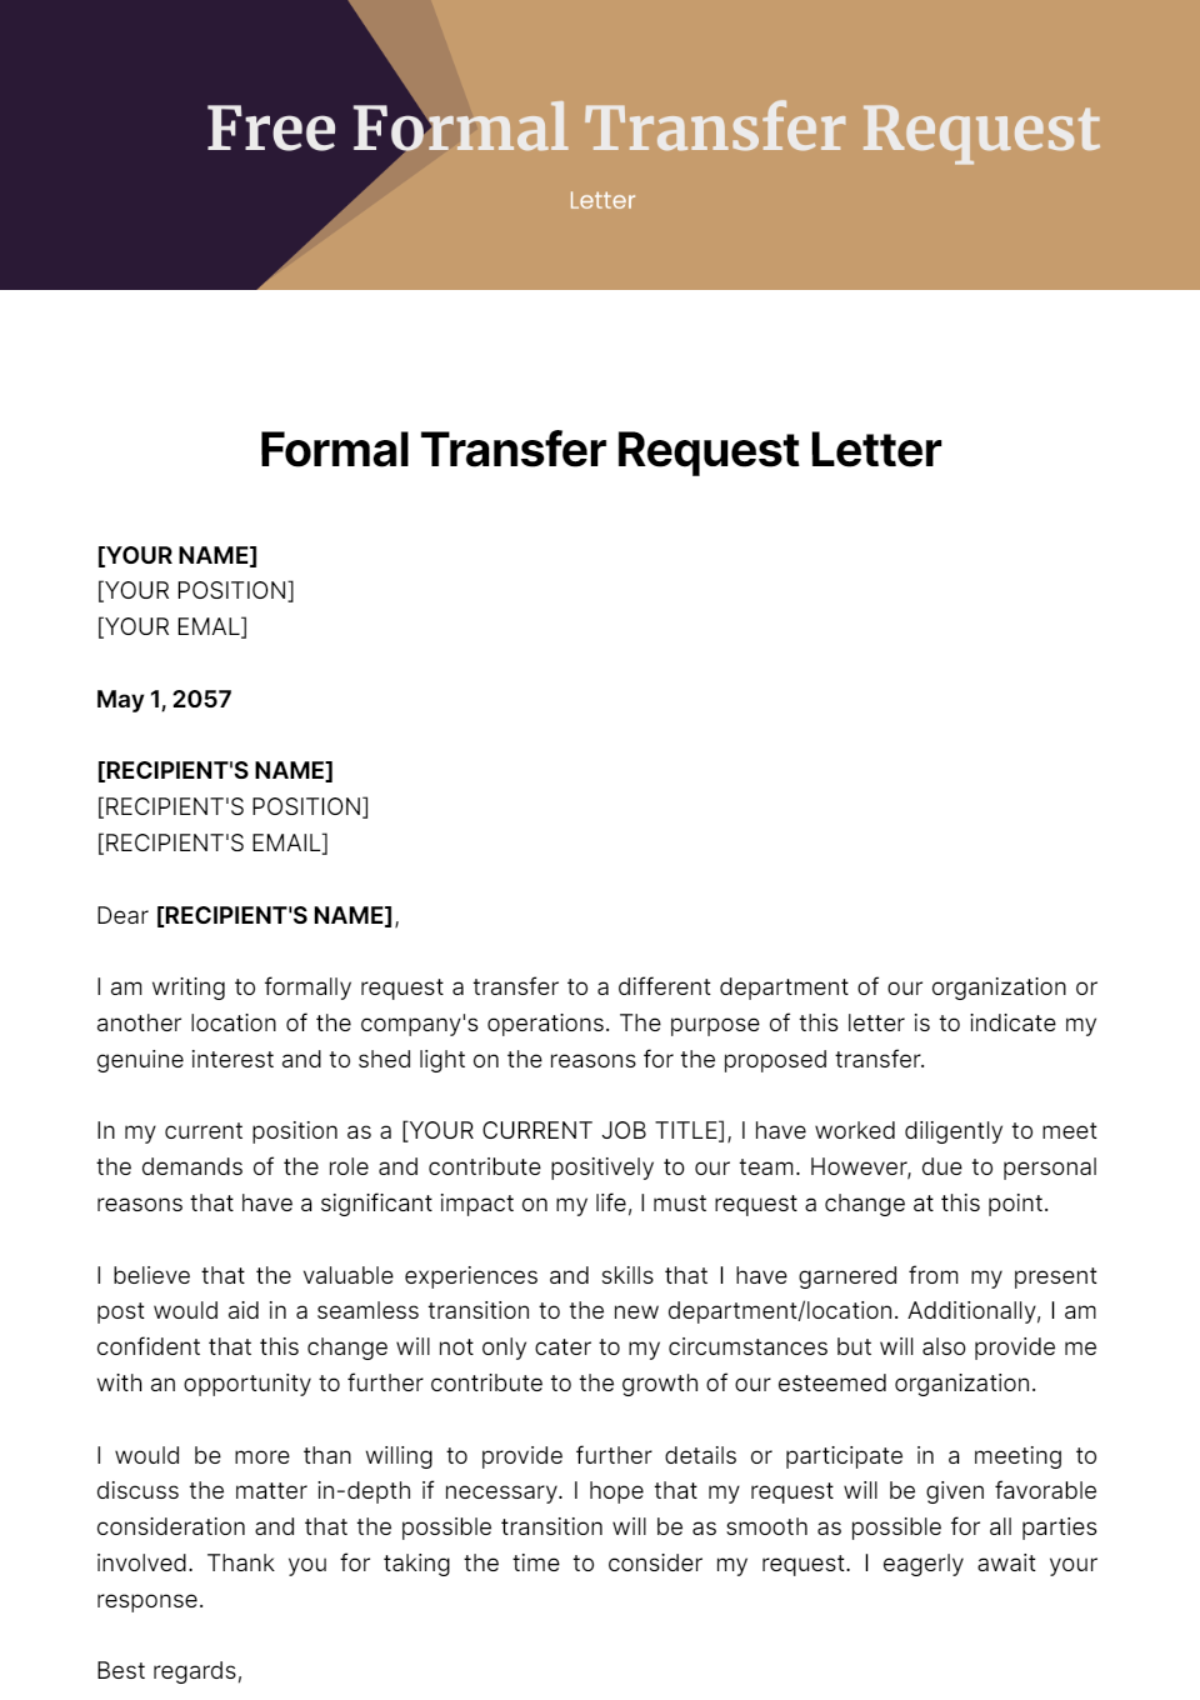 Free Formal Transfer Request Letter Template